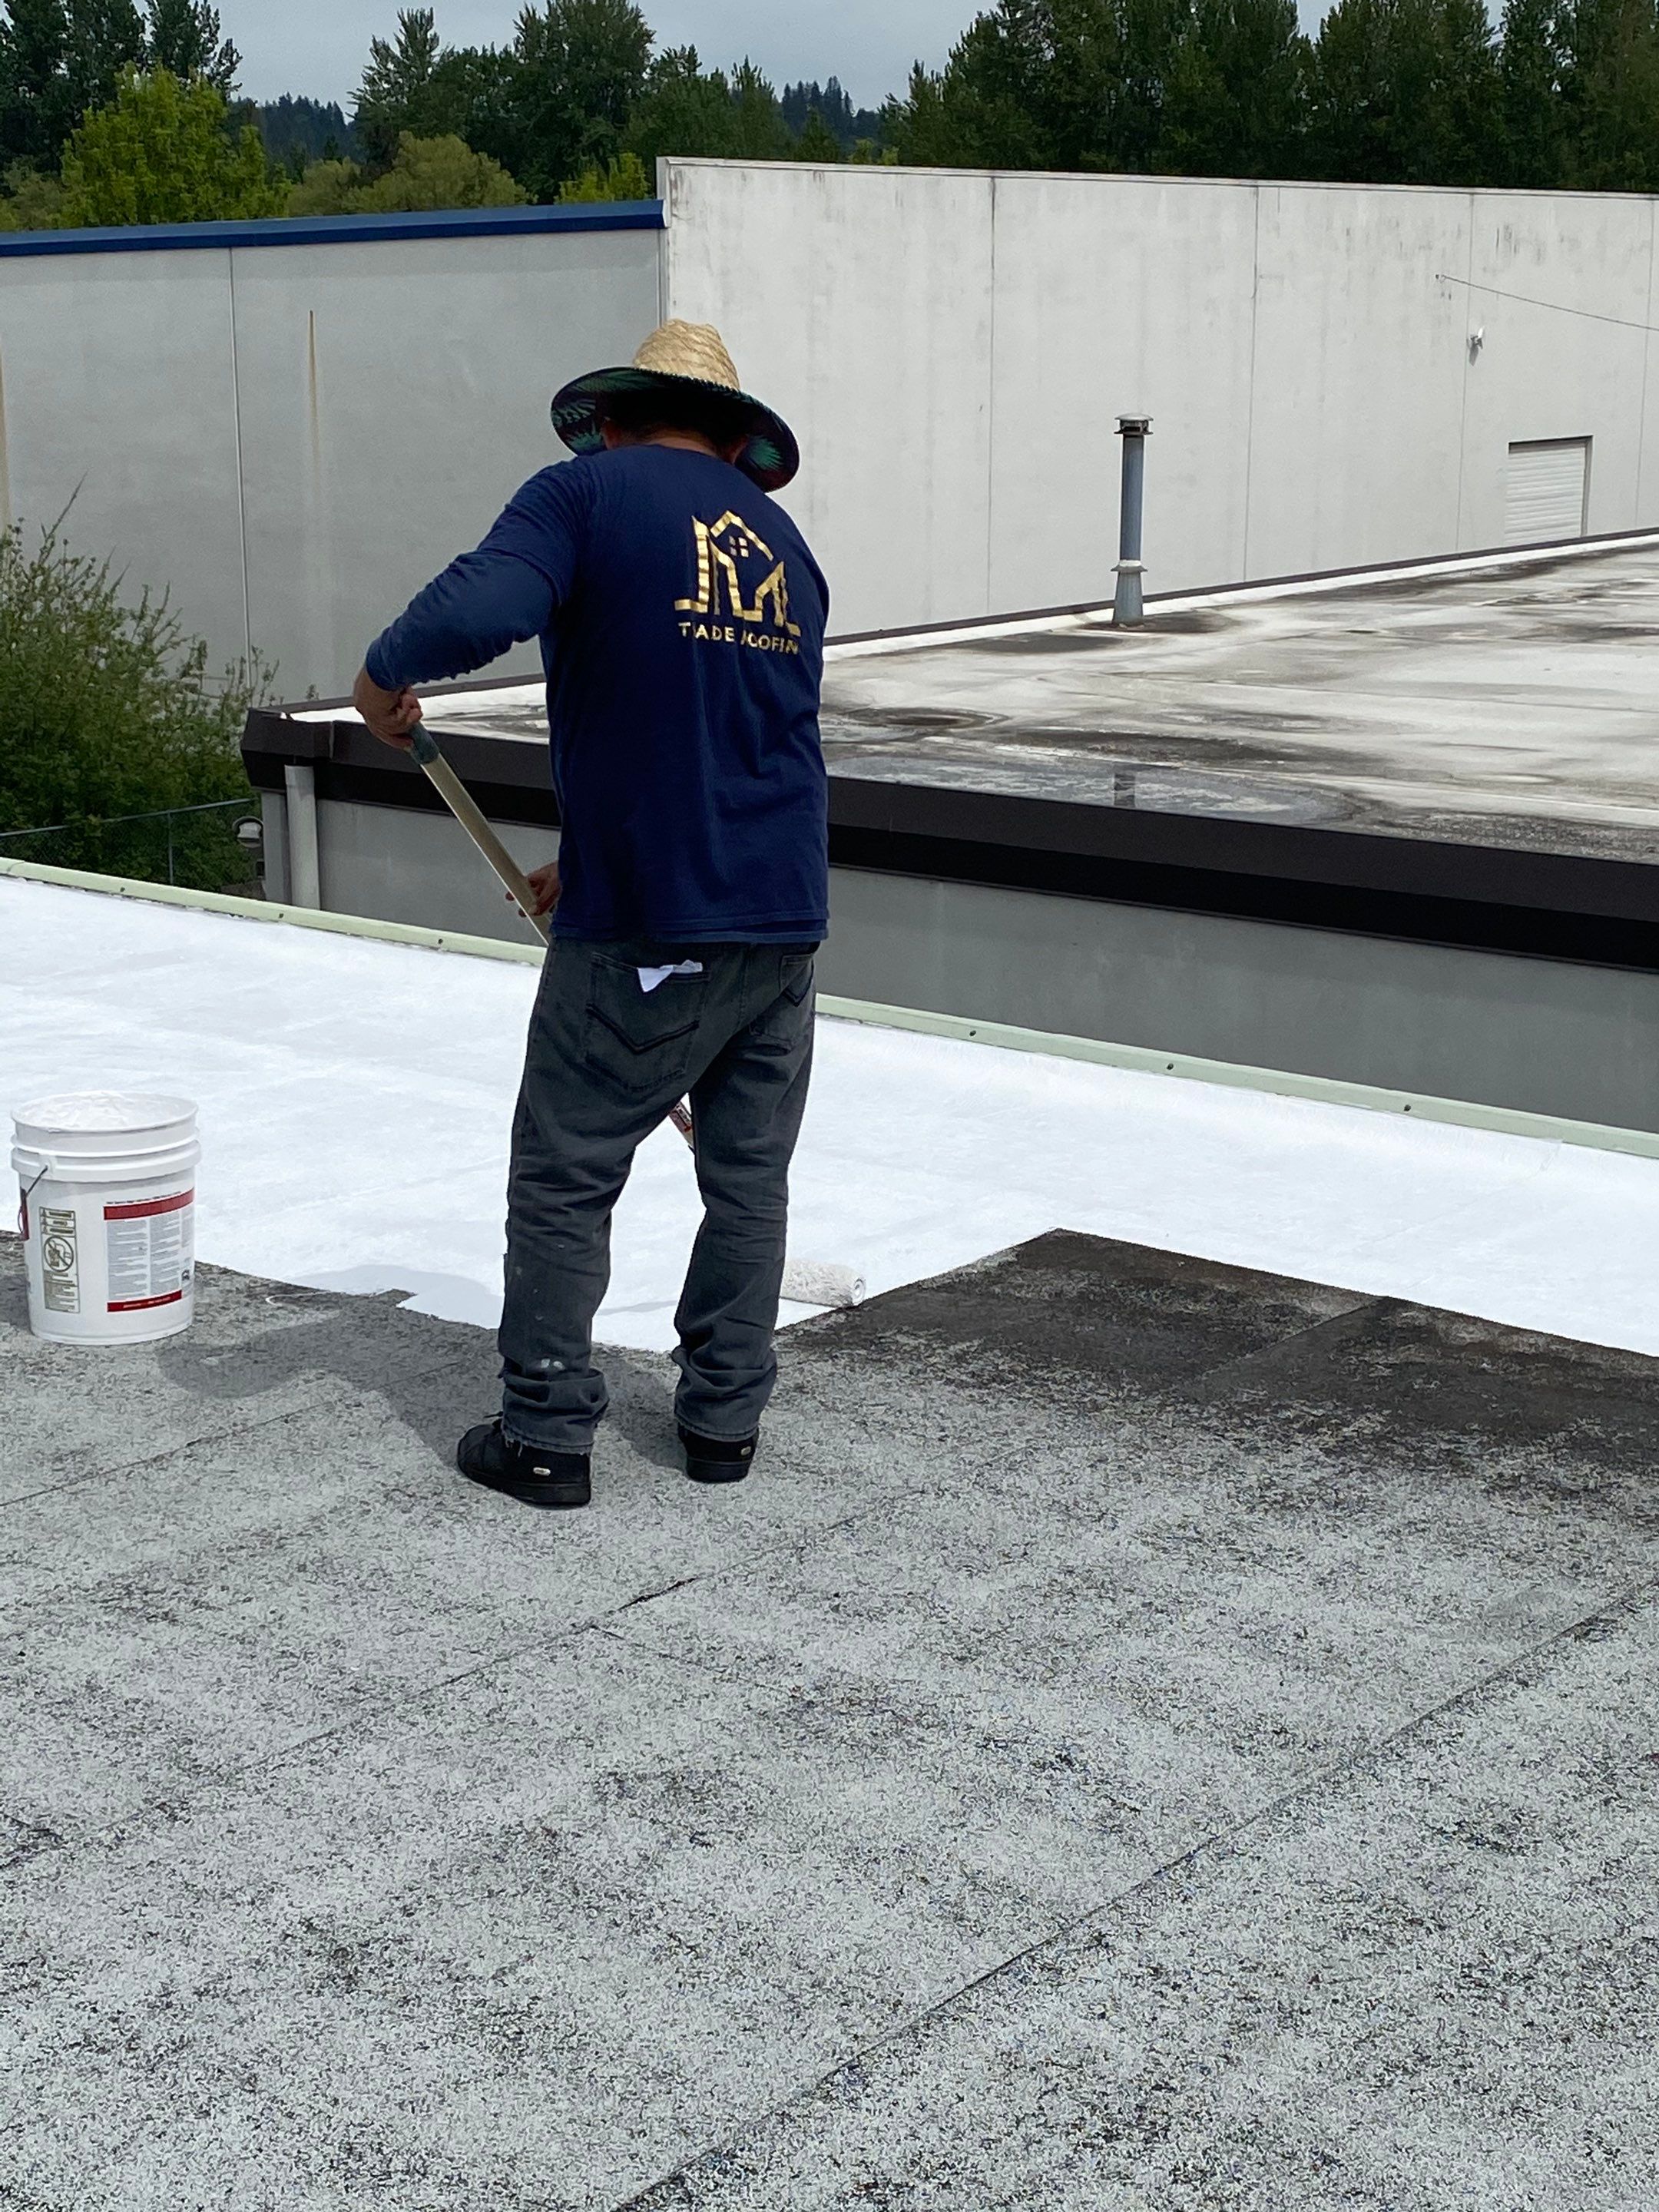 actvity in commercial roof Appliyng Liquid silicone on roof for roof life extension. System For a commercial building